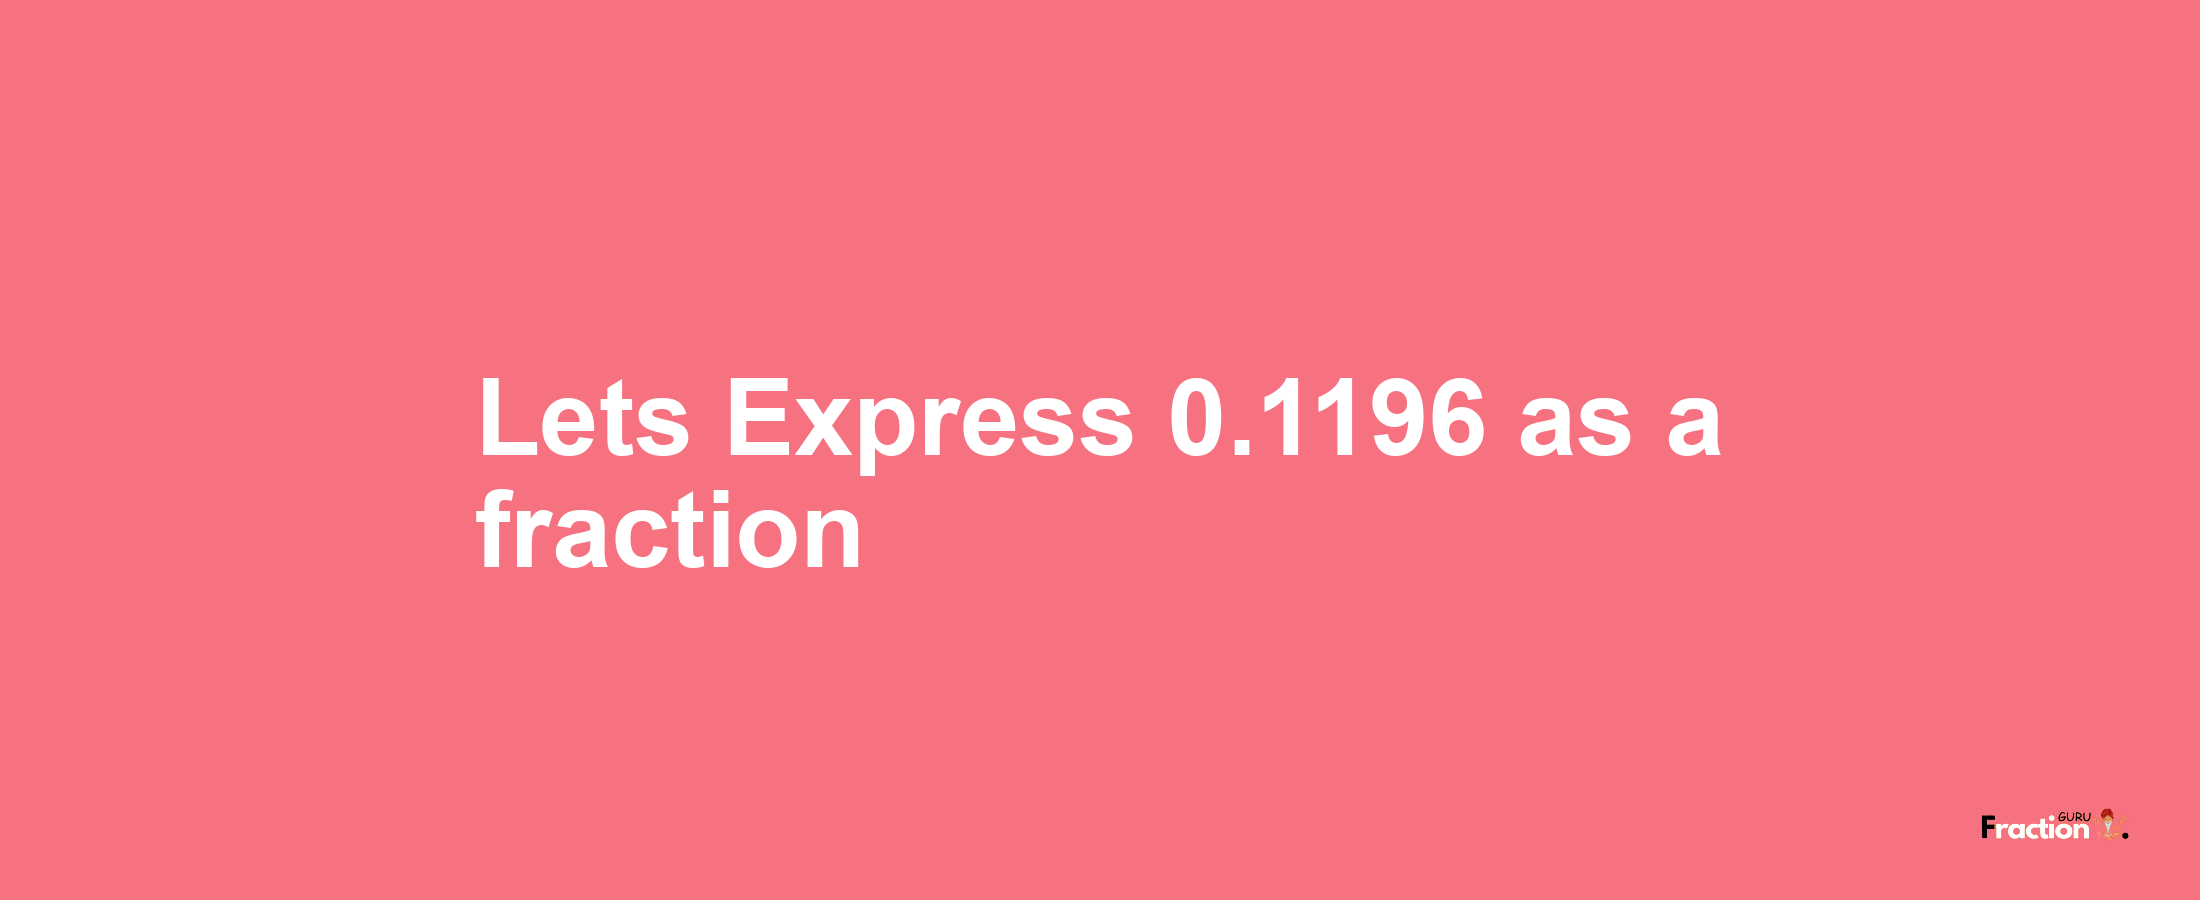 Lets Express 0.1196 as afraction